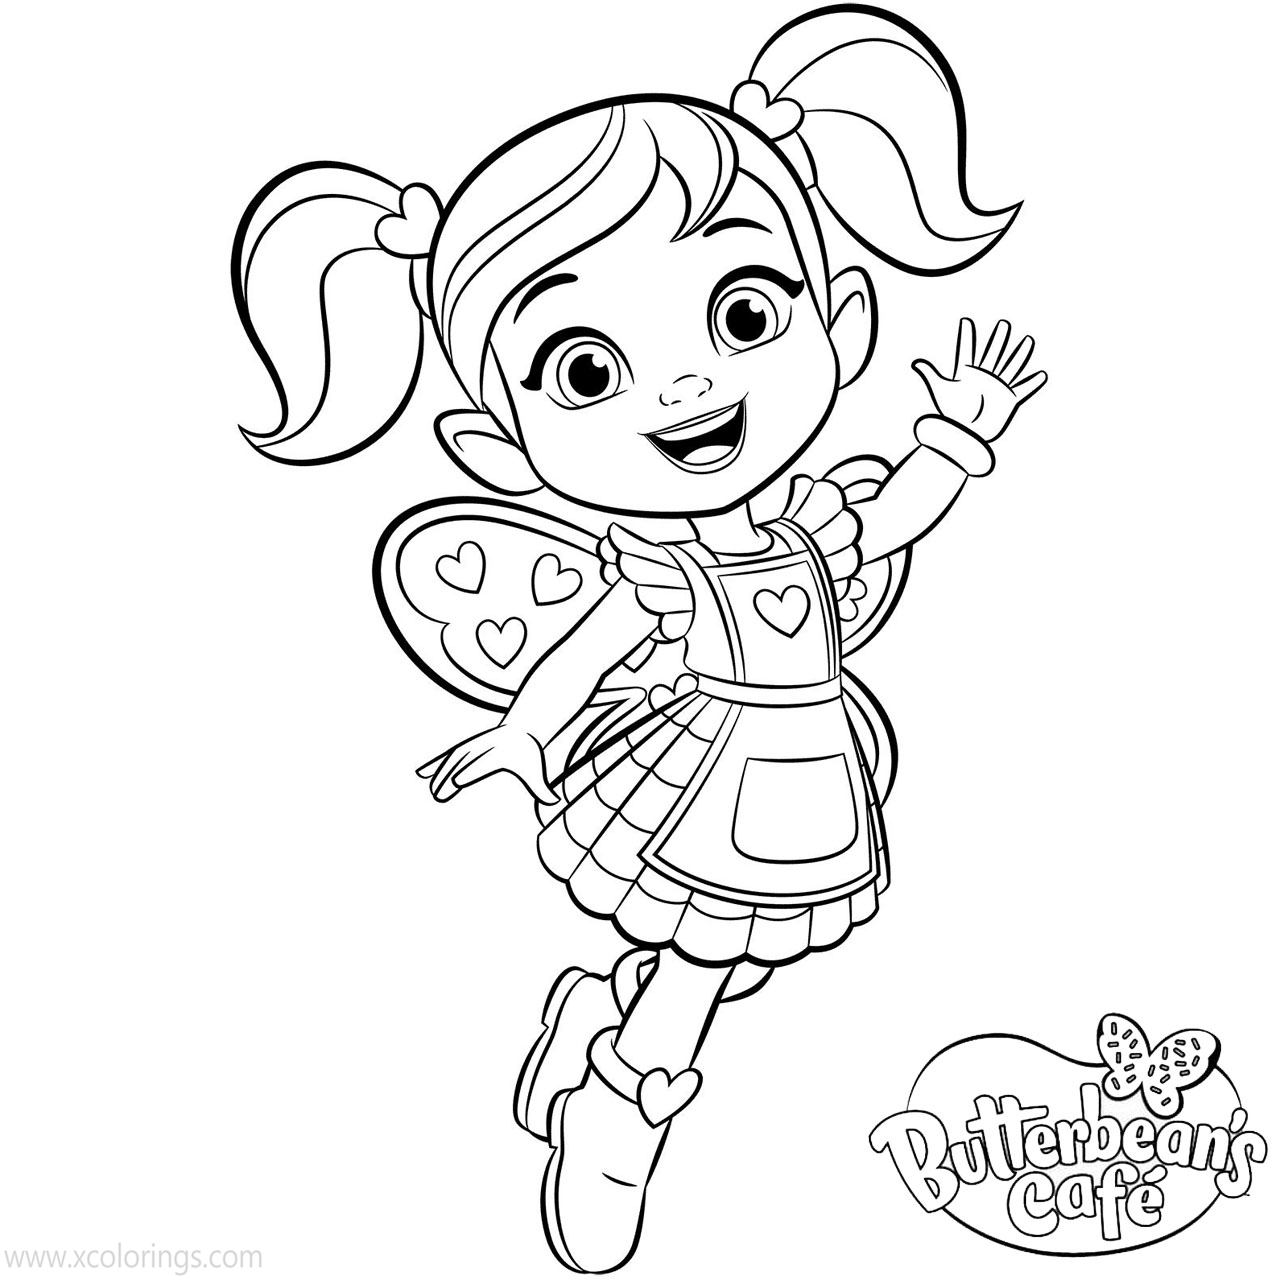 Free Cricket from Butterbean's Cafe Coloring Pages printable